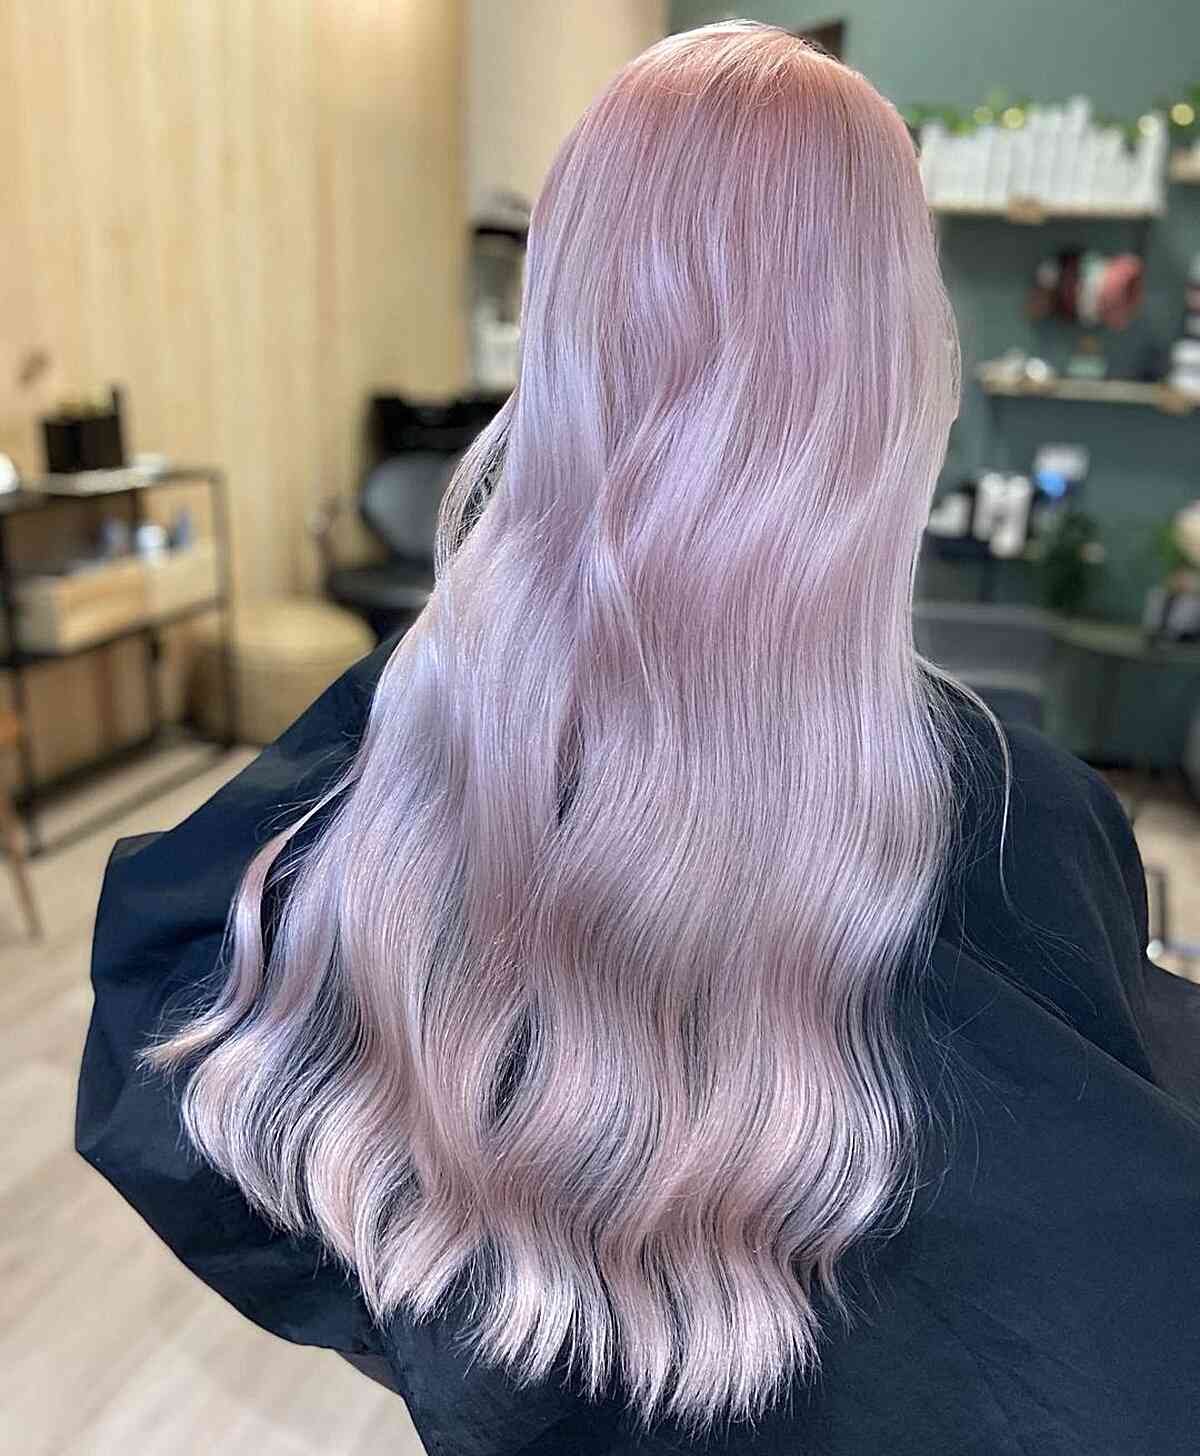 Cotton Candy Pink Pastel Waves for Longer Hair